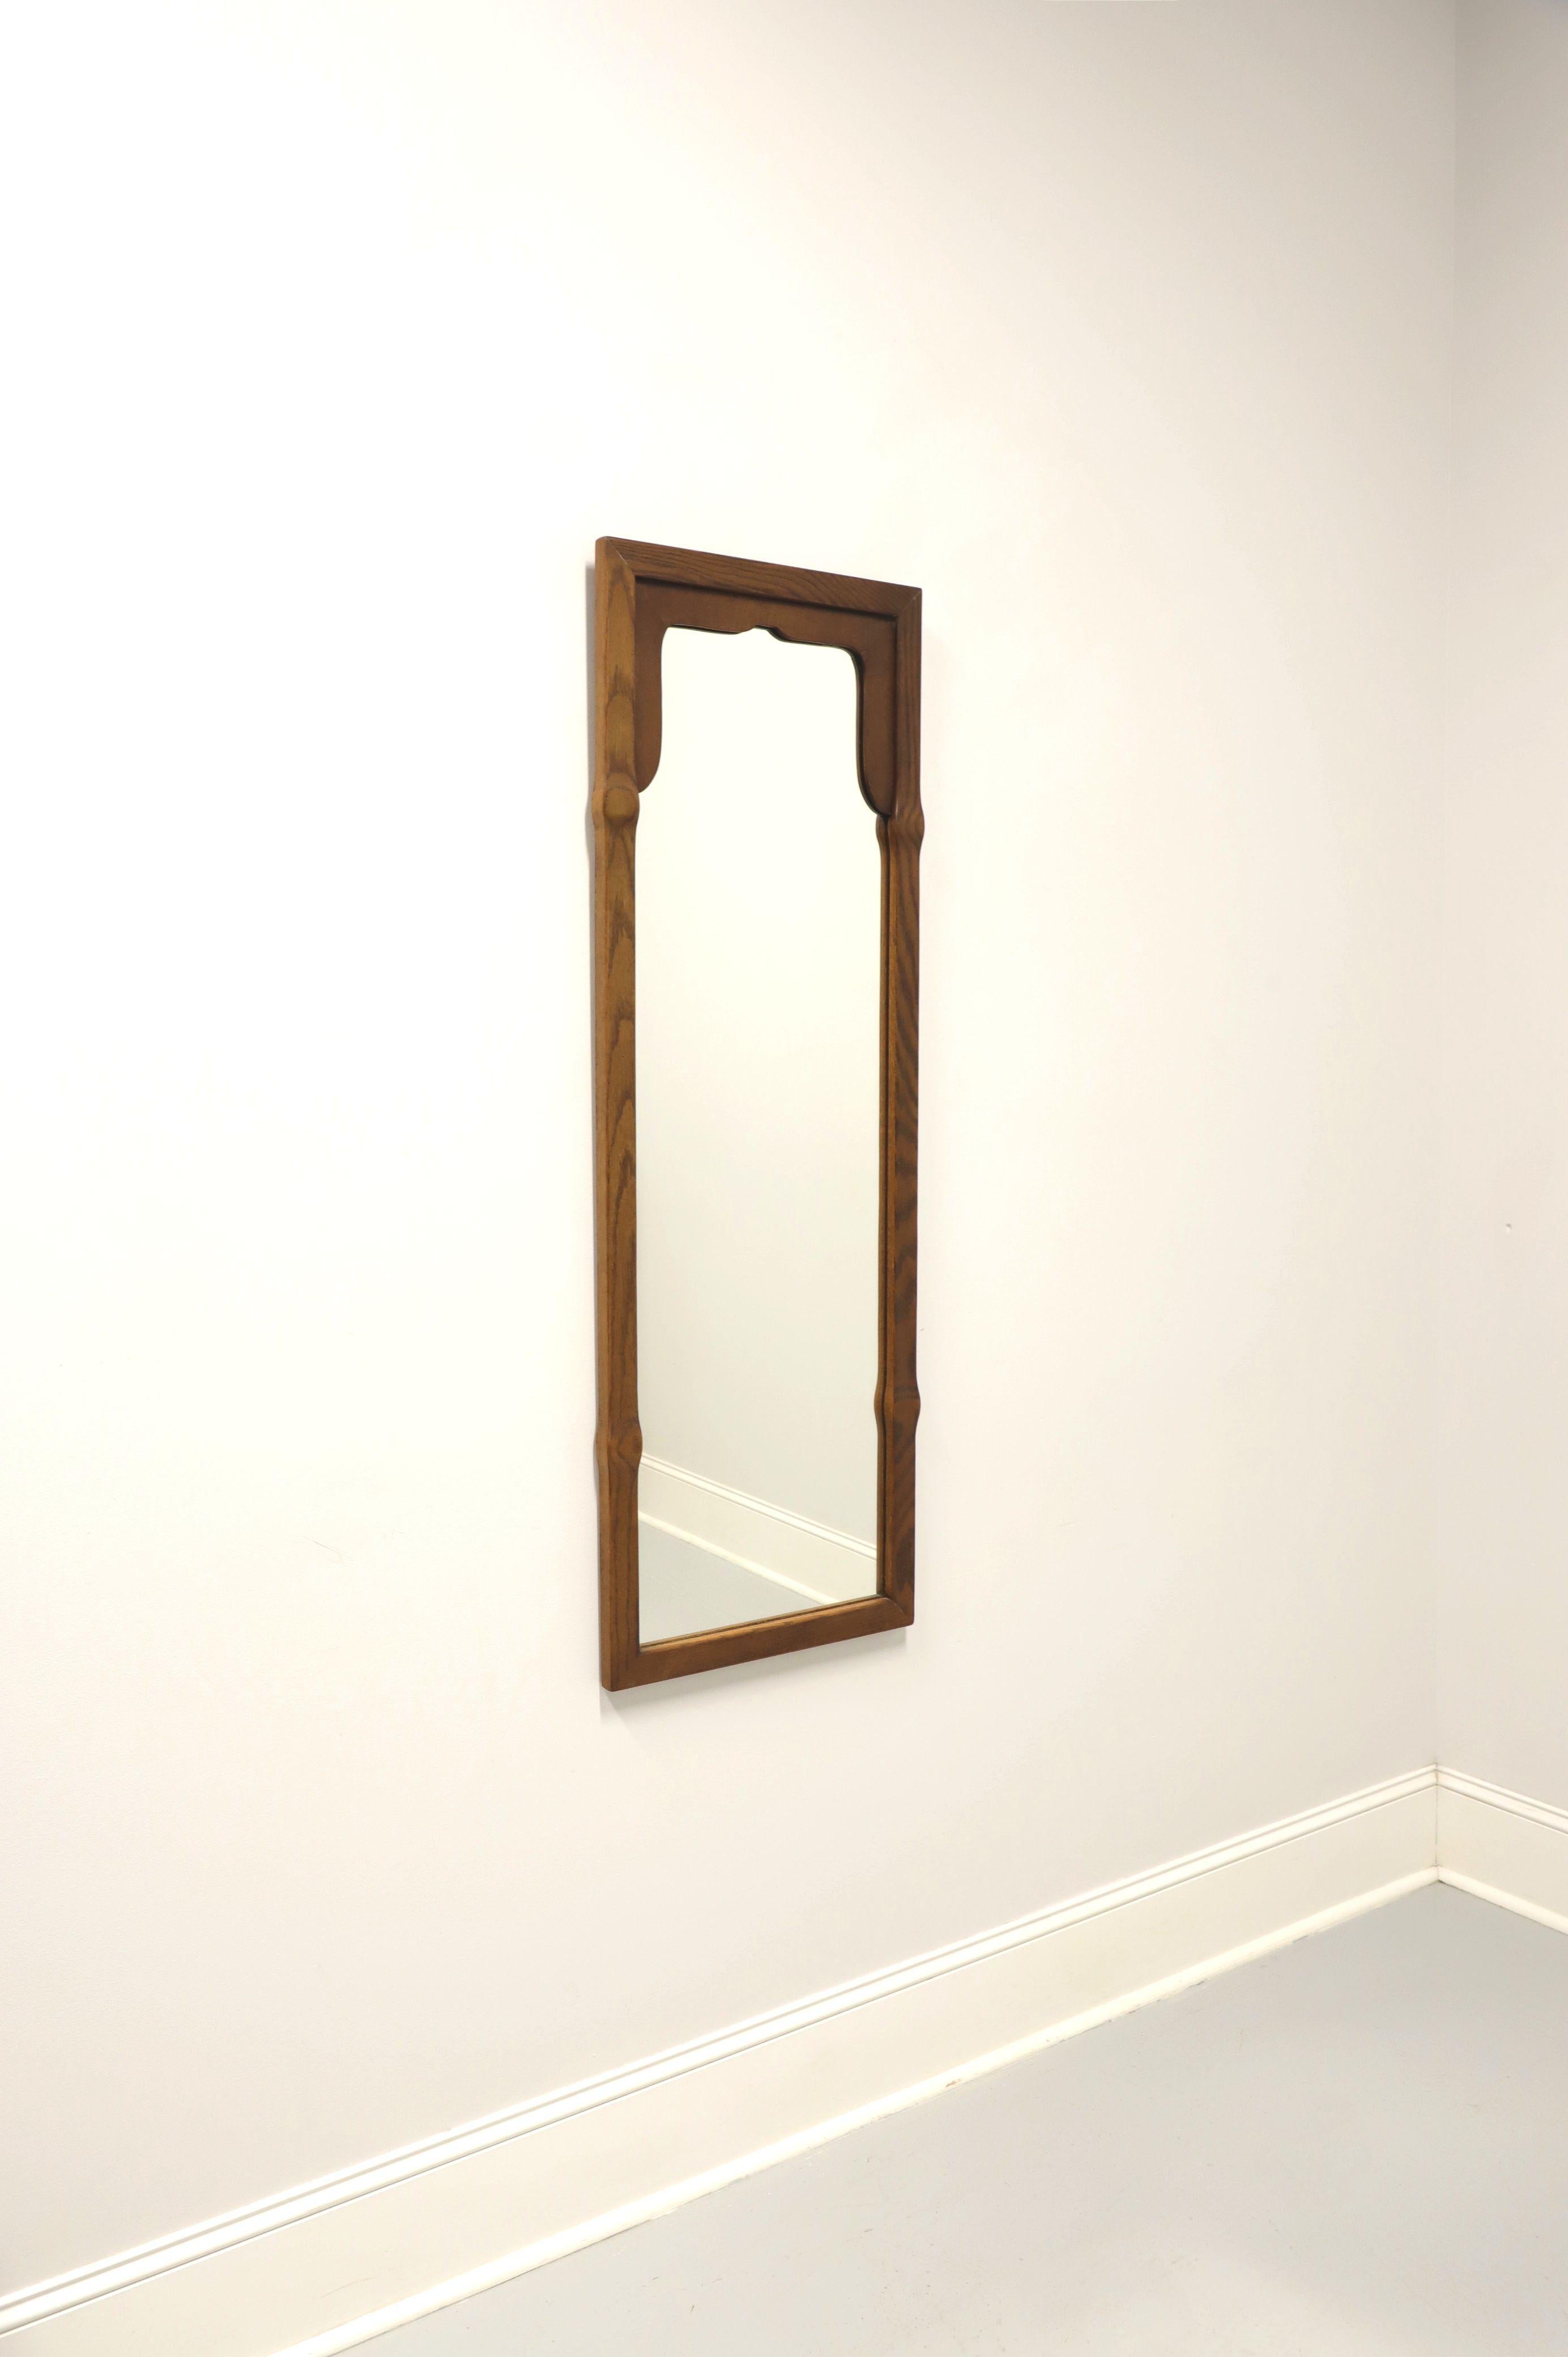 A Regency style wall mirror, unbranded, similar quality to Tomlinson. Mirrored glass in an oak wood rectangular frame with slight rounding at four points. Features an arched dark walnut insert to inside top of the oak frame. Made in North Carolina,